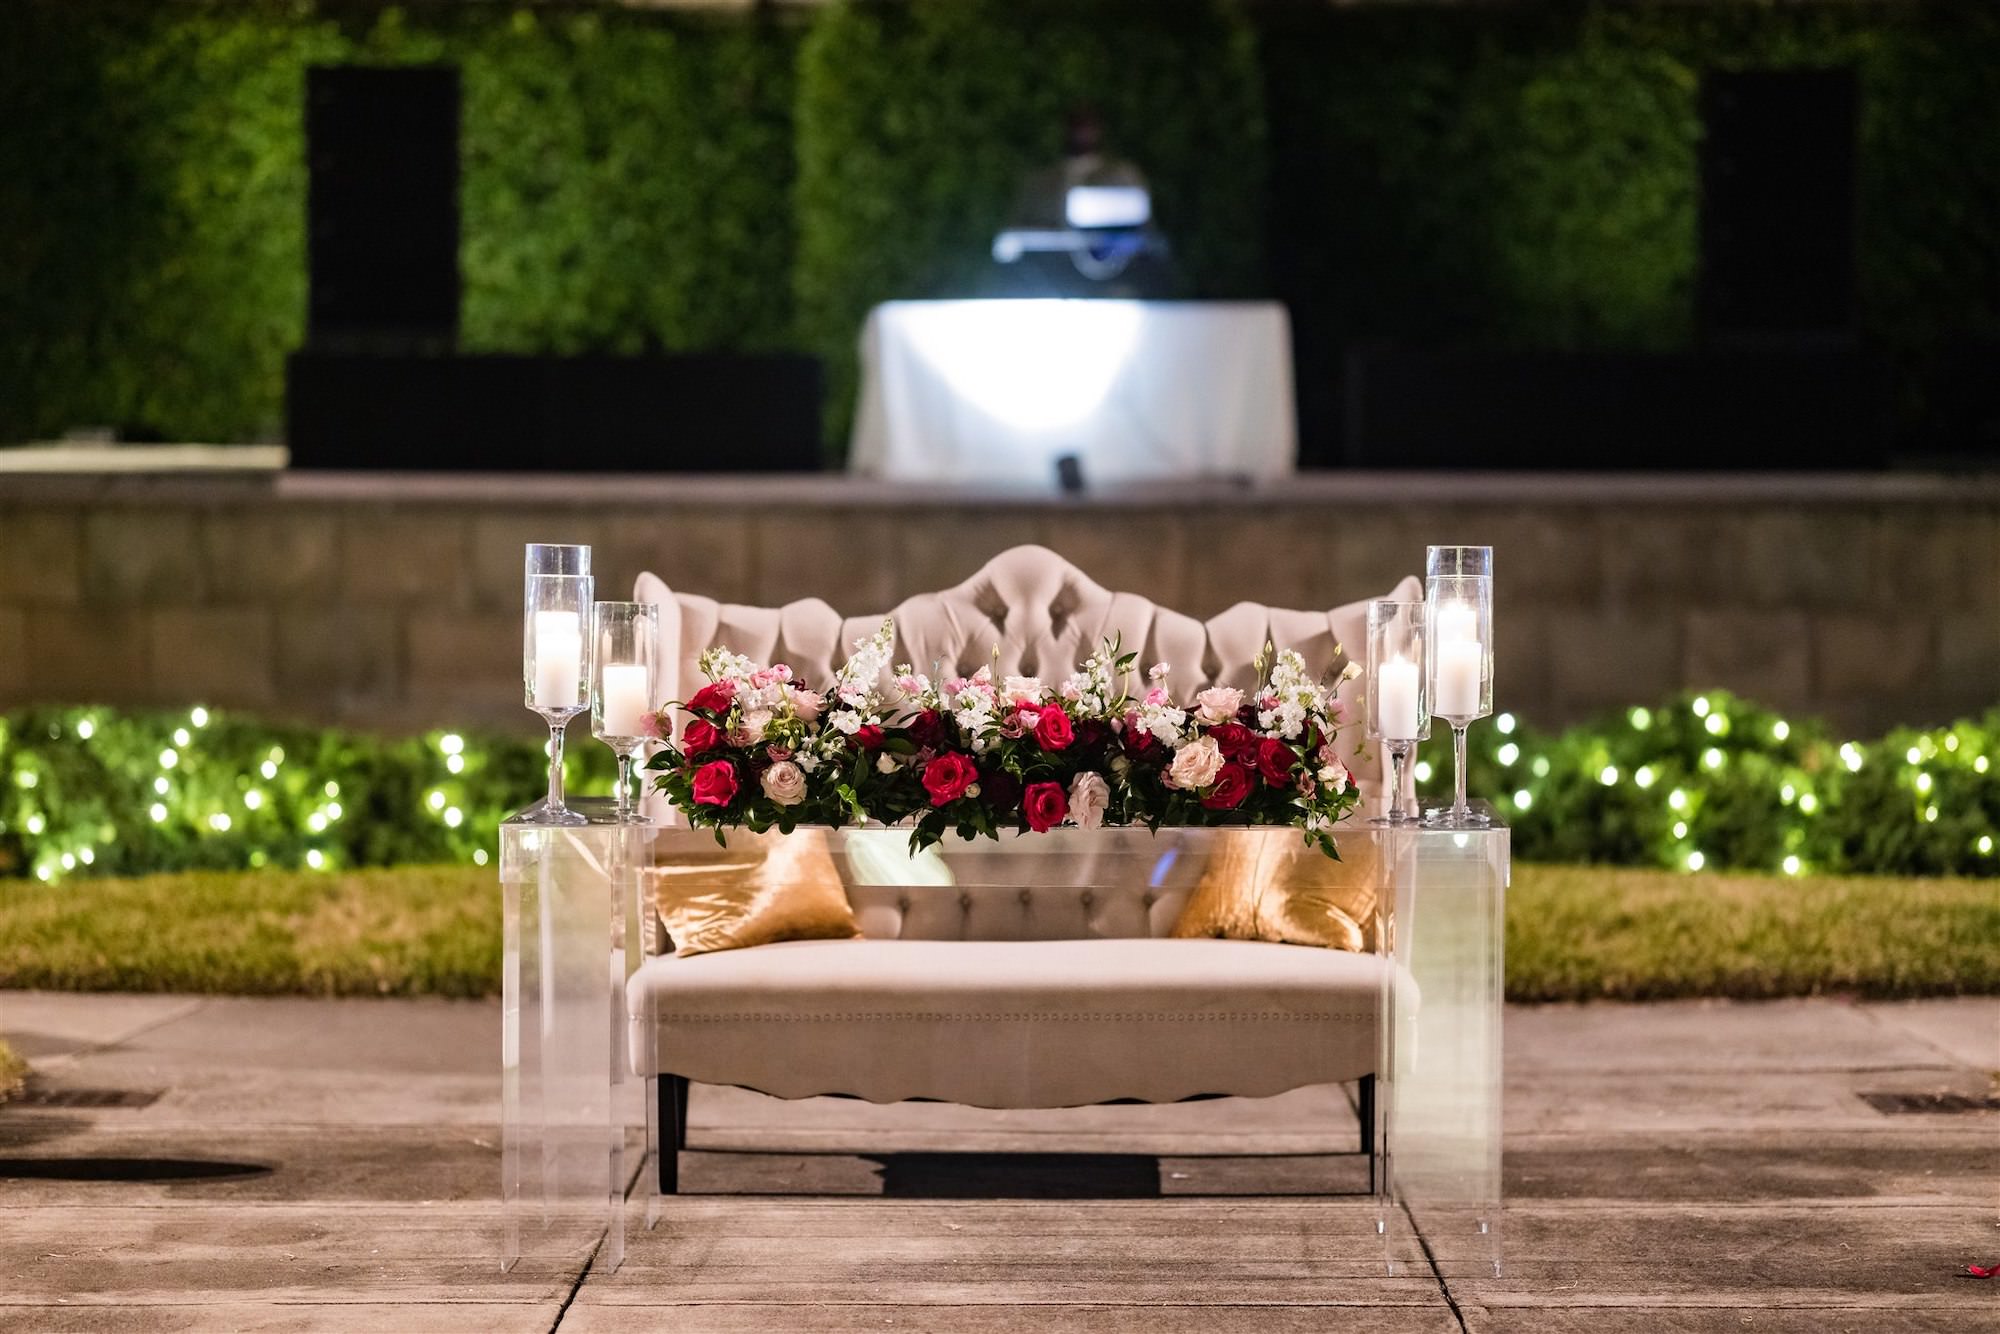 Modern Sweetheart Table Ideas | Glass Pillar Candle Holder | Pink, White, and Burgundy Rose Table Flower Arrangements with Tufted Settee Loveseat | Tampa Bay Wedding Florist FH Events